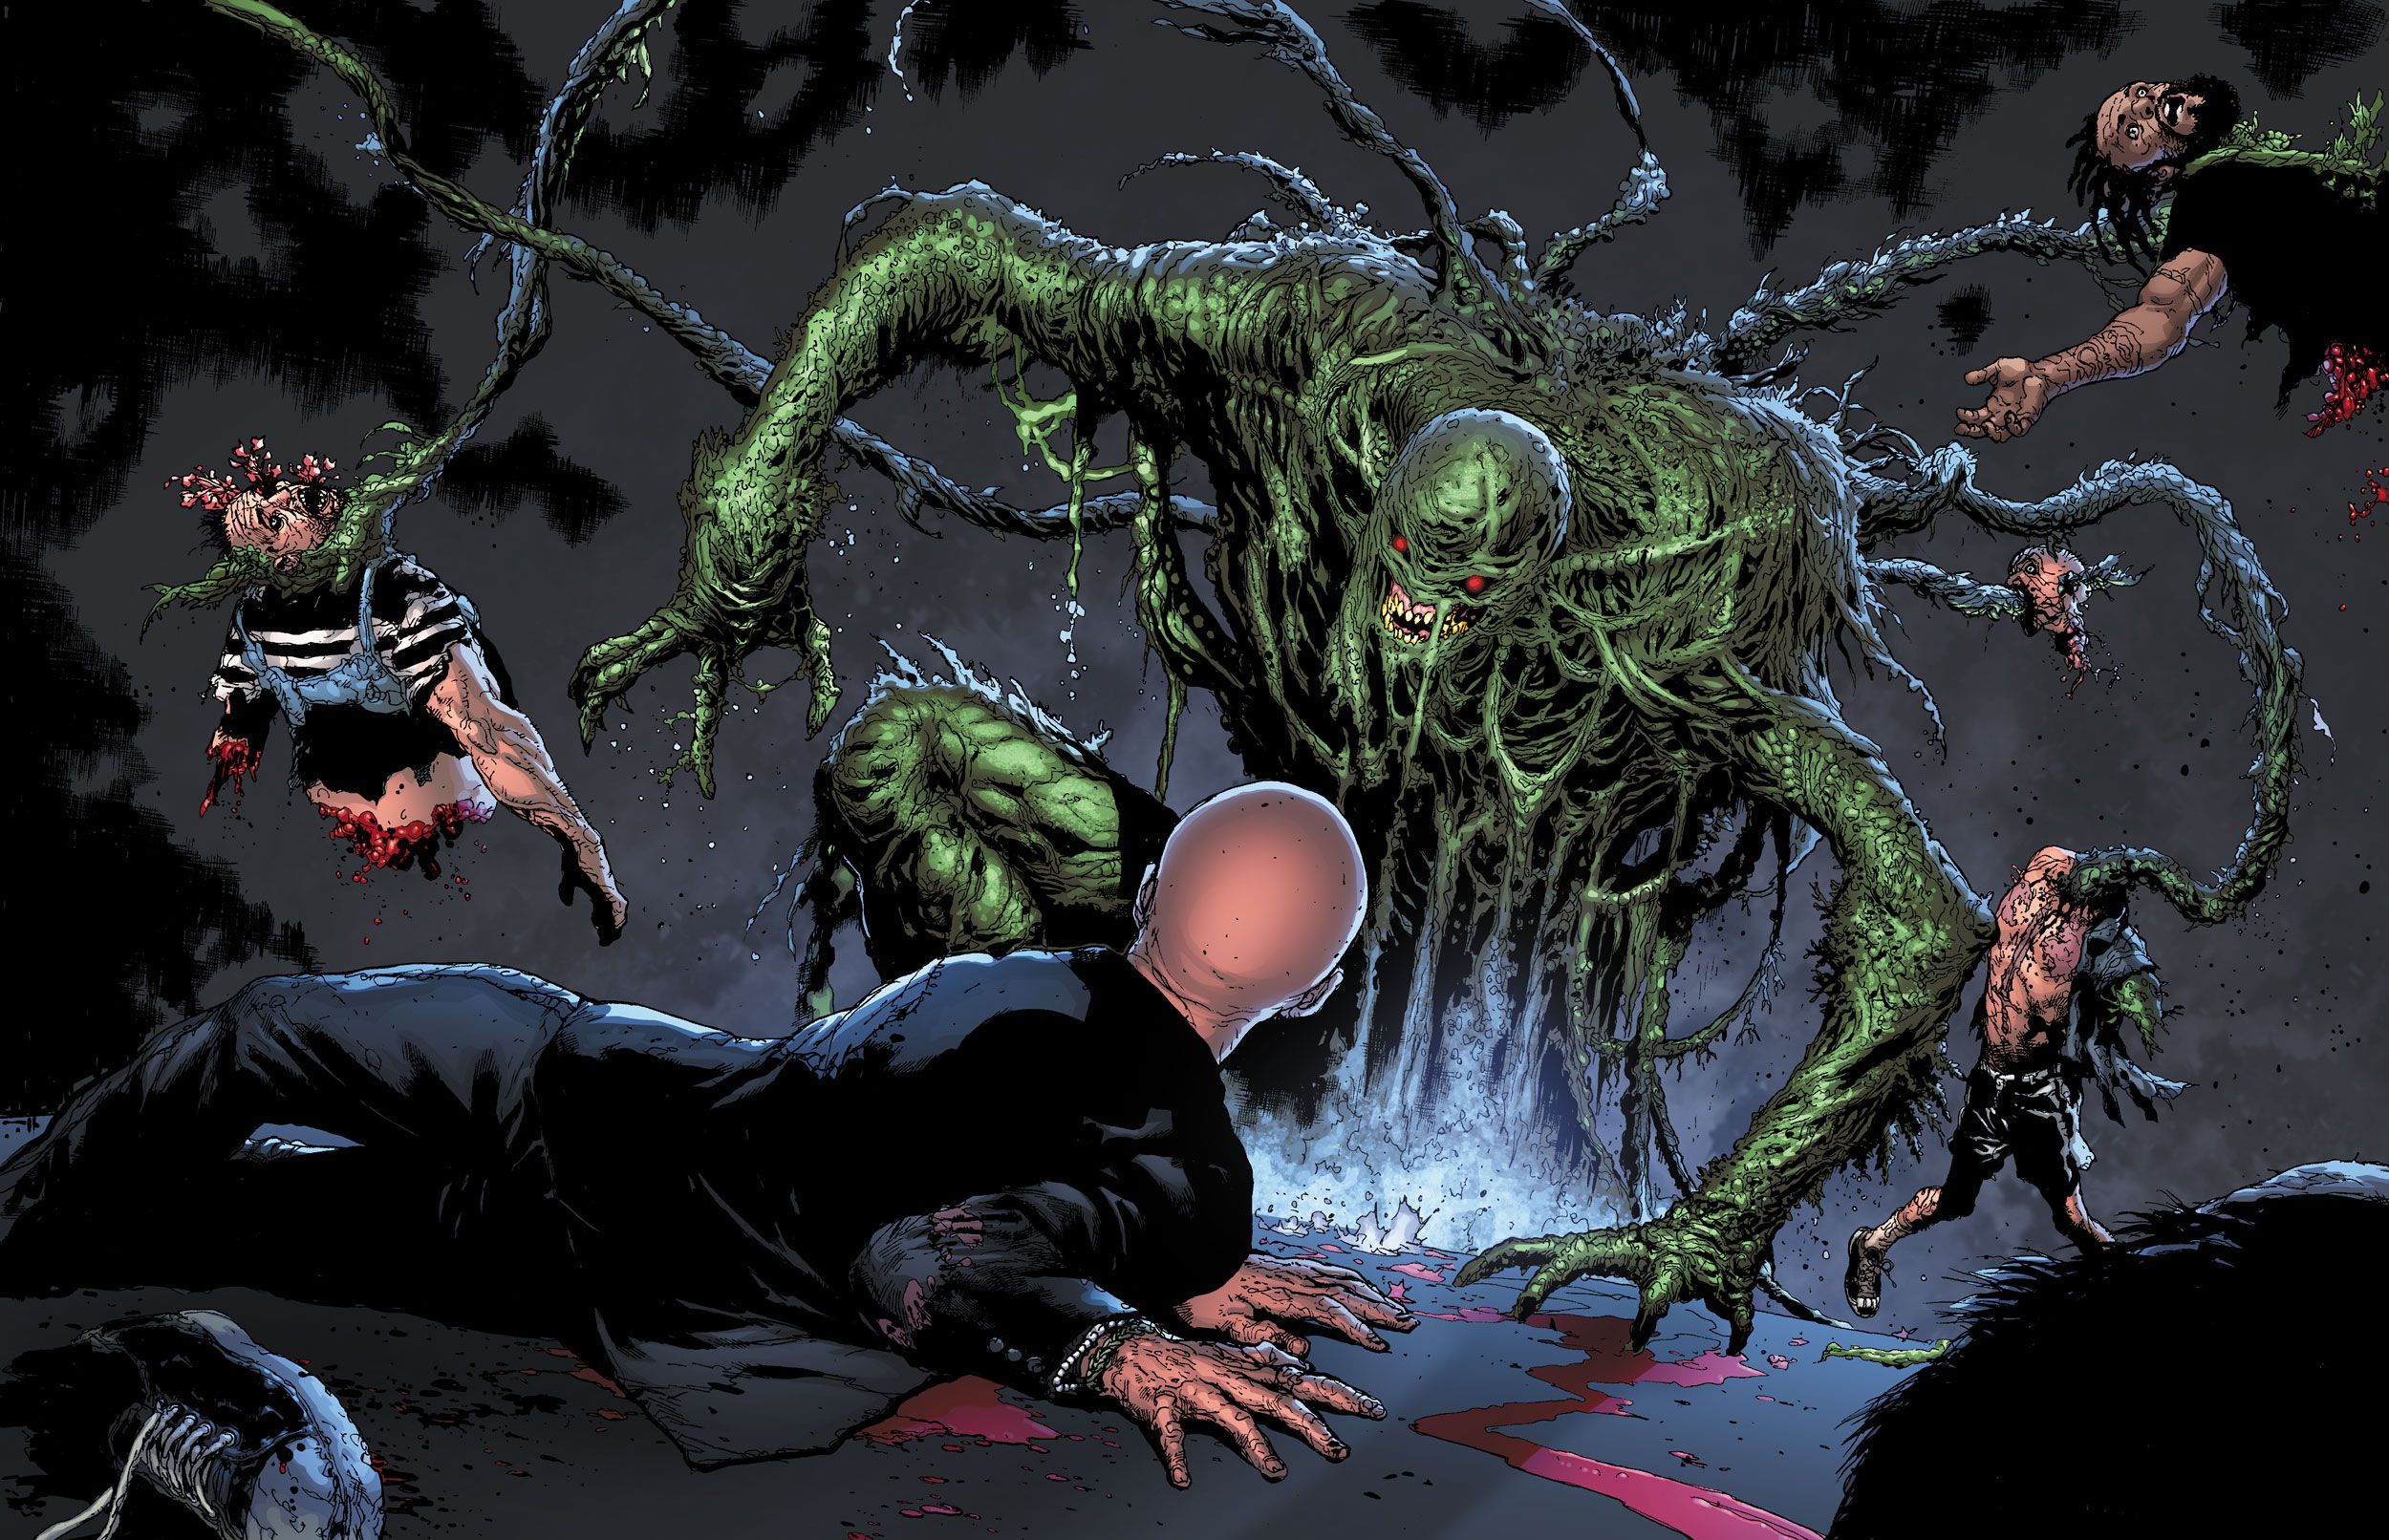 Interior art from the DC Comics Black Label series Swamp Thing Green Hell 1 by Doug Mahnke